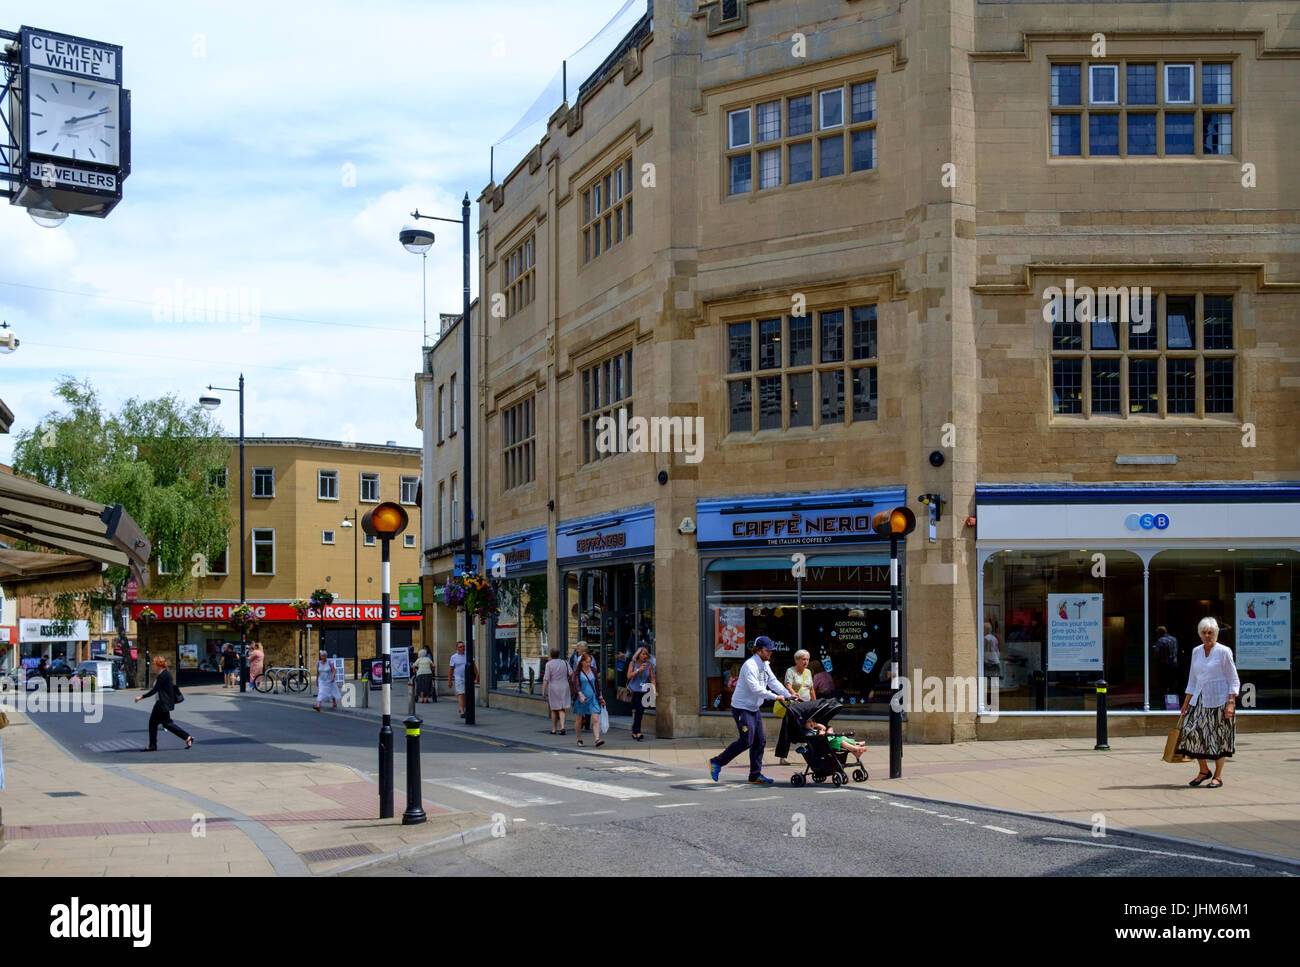 Yeovil a small town in somerset England UK Stock Photo